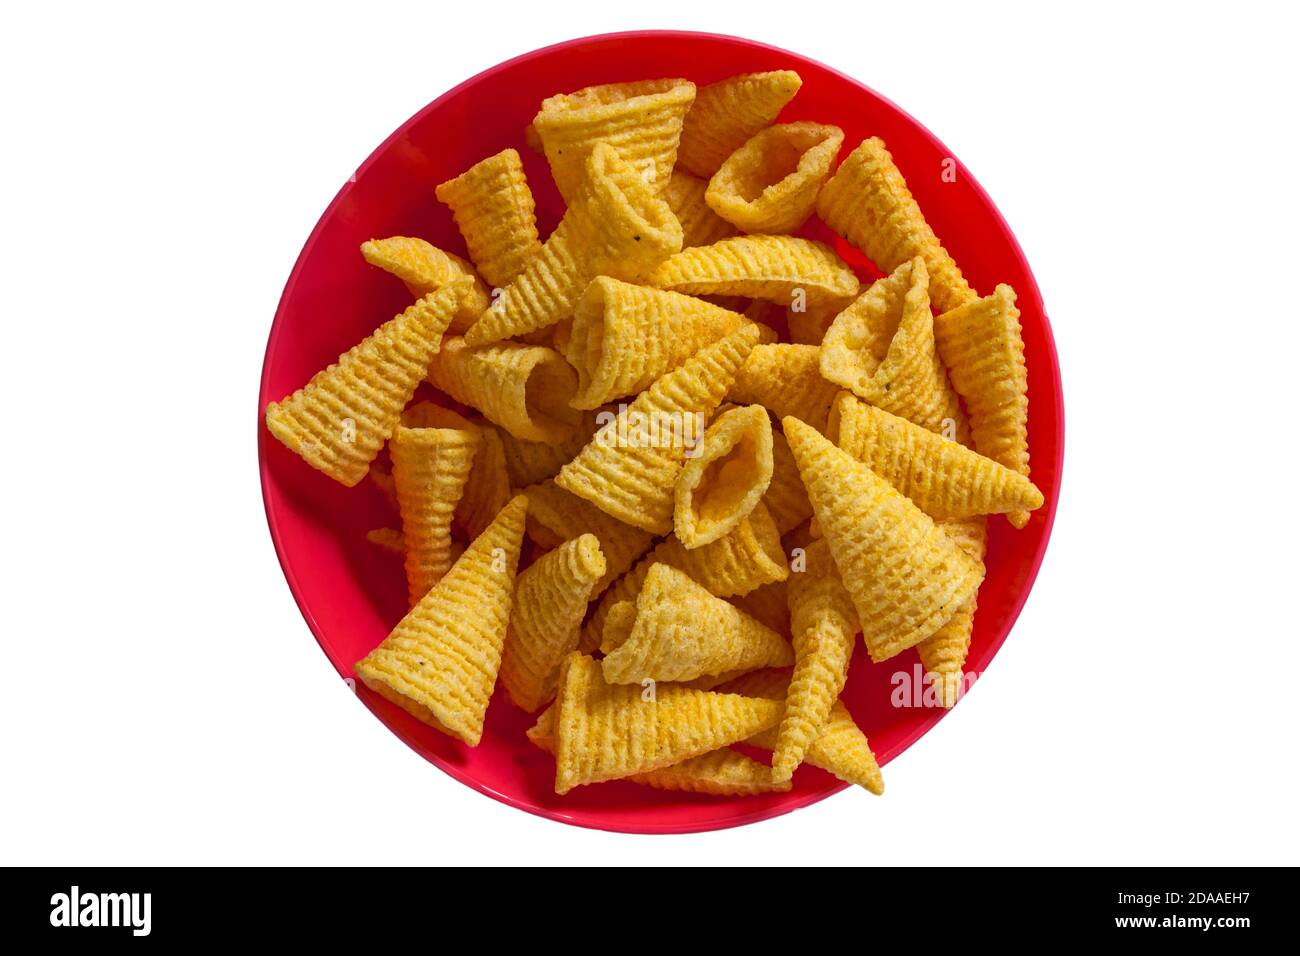 Walkers Bugles cheese flavour corn snack in colourful red bowl isolated on  white background Stock Photo - Alamy